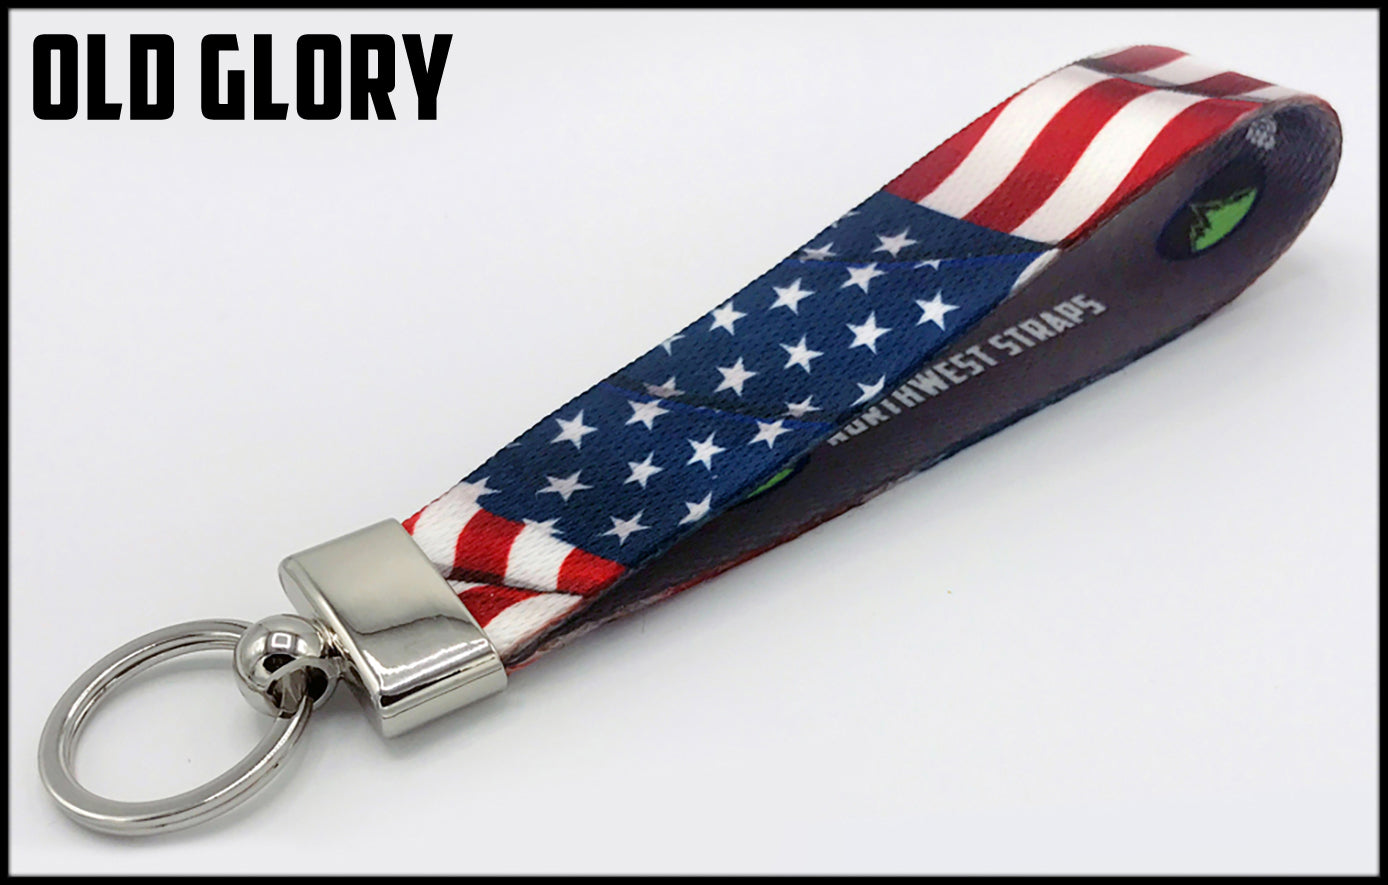 Old glory American flag. 1 inch custom picture quality polyester webbing keyfob. Design by Northwest Straps.